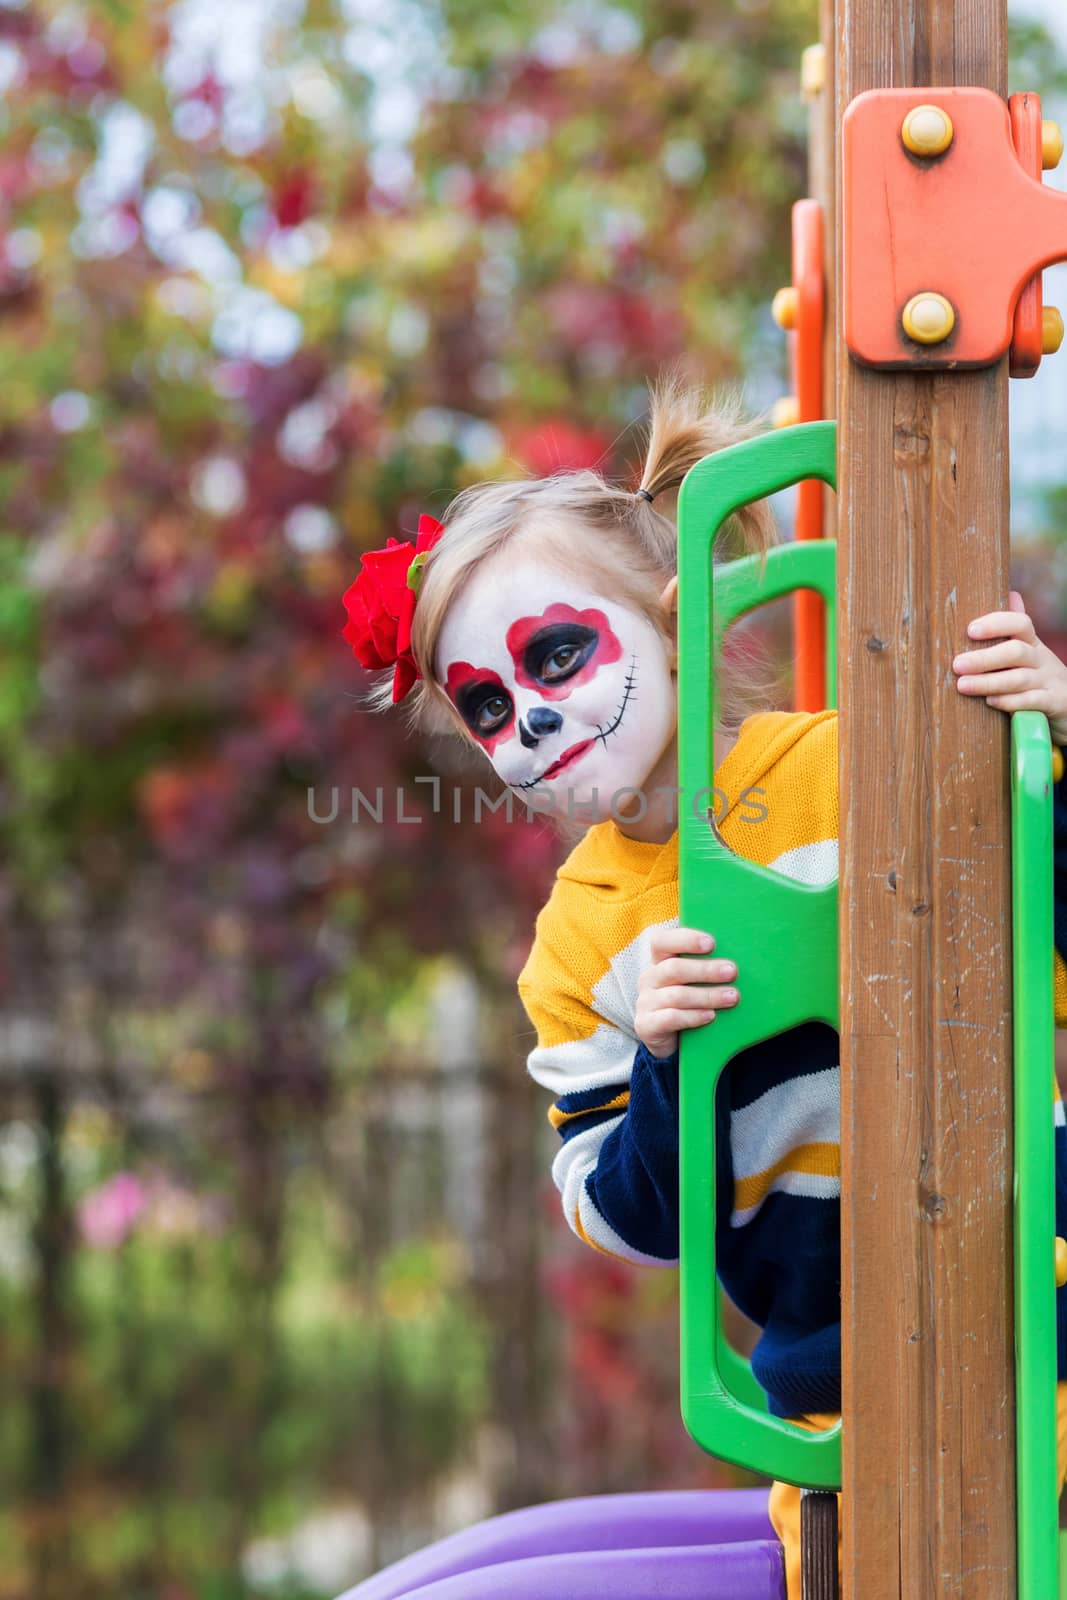 A little girl with Painted Face, climbed the slide on Day of the Dead. by galinasharapova